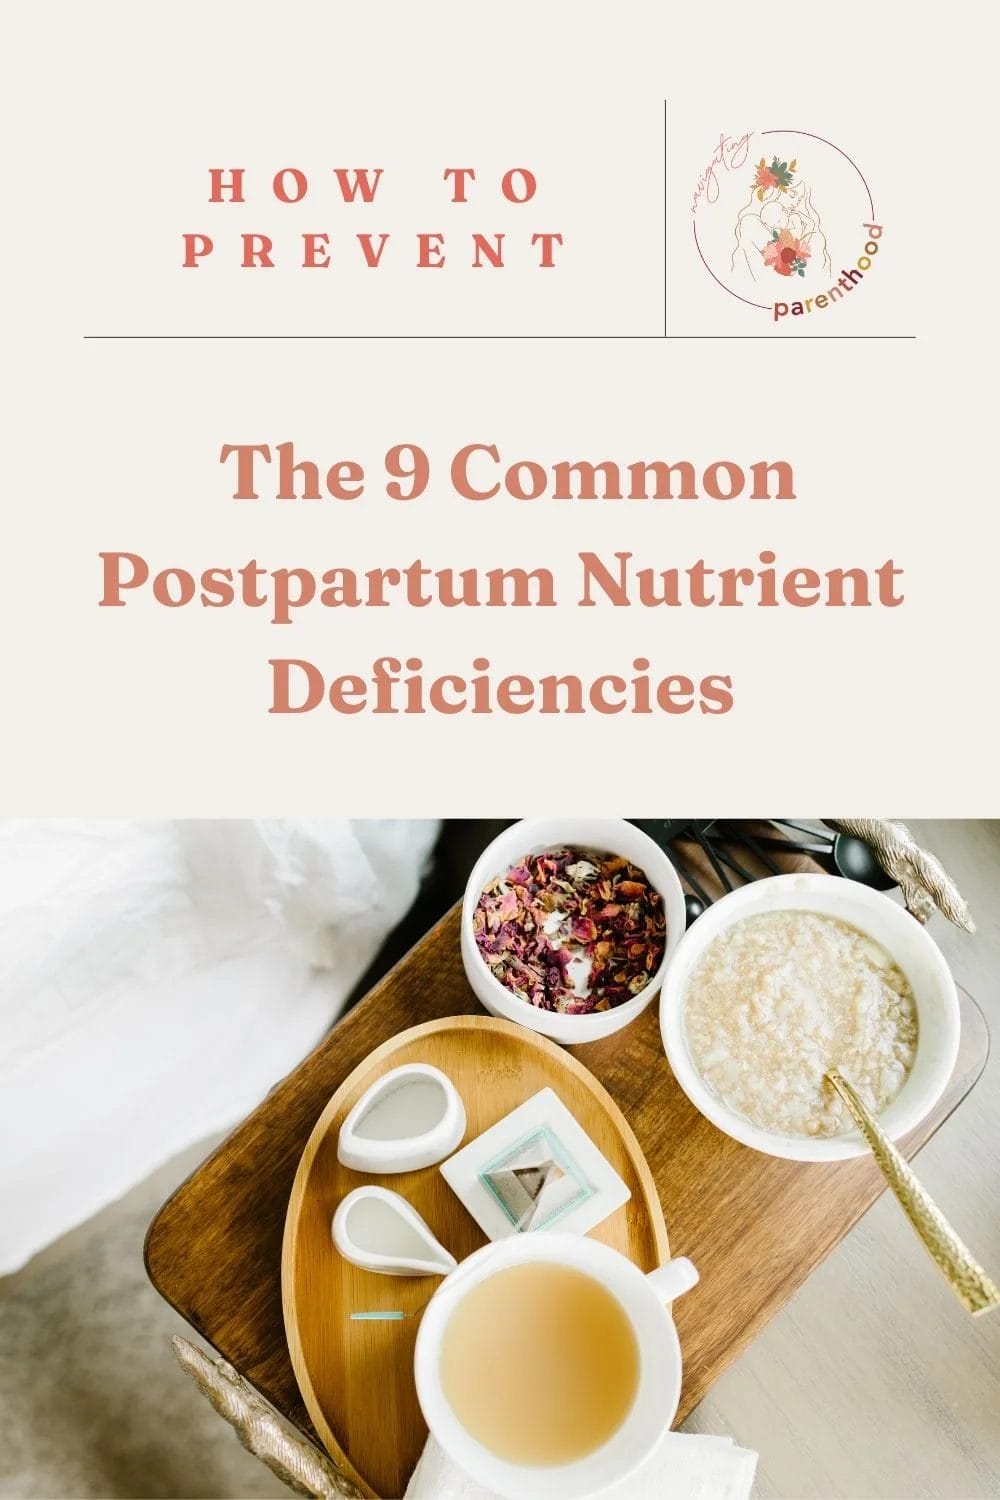 The 9 Most Common Postpartum Nutrient Deficiencies and How to Prevent Them